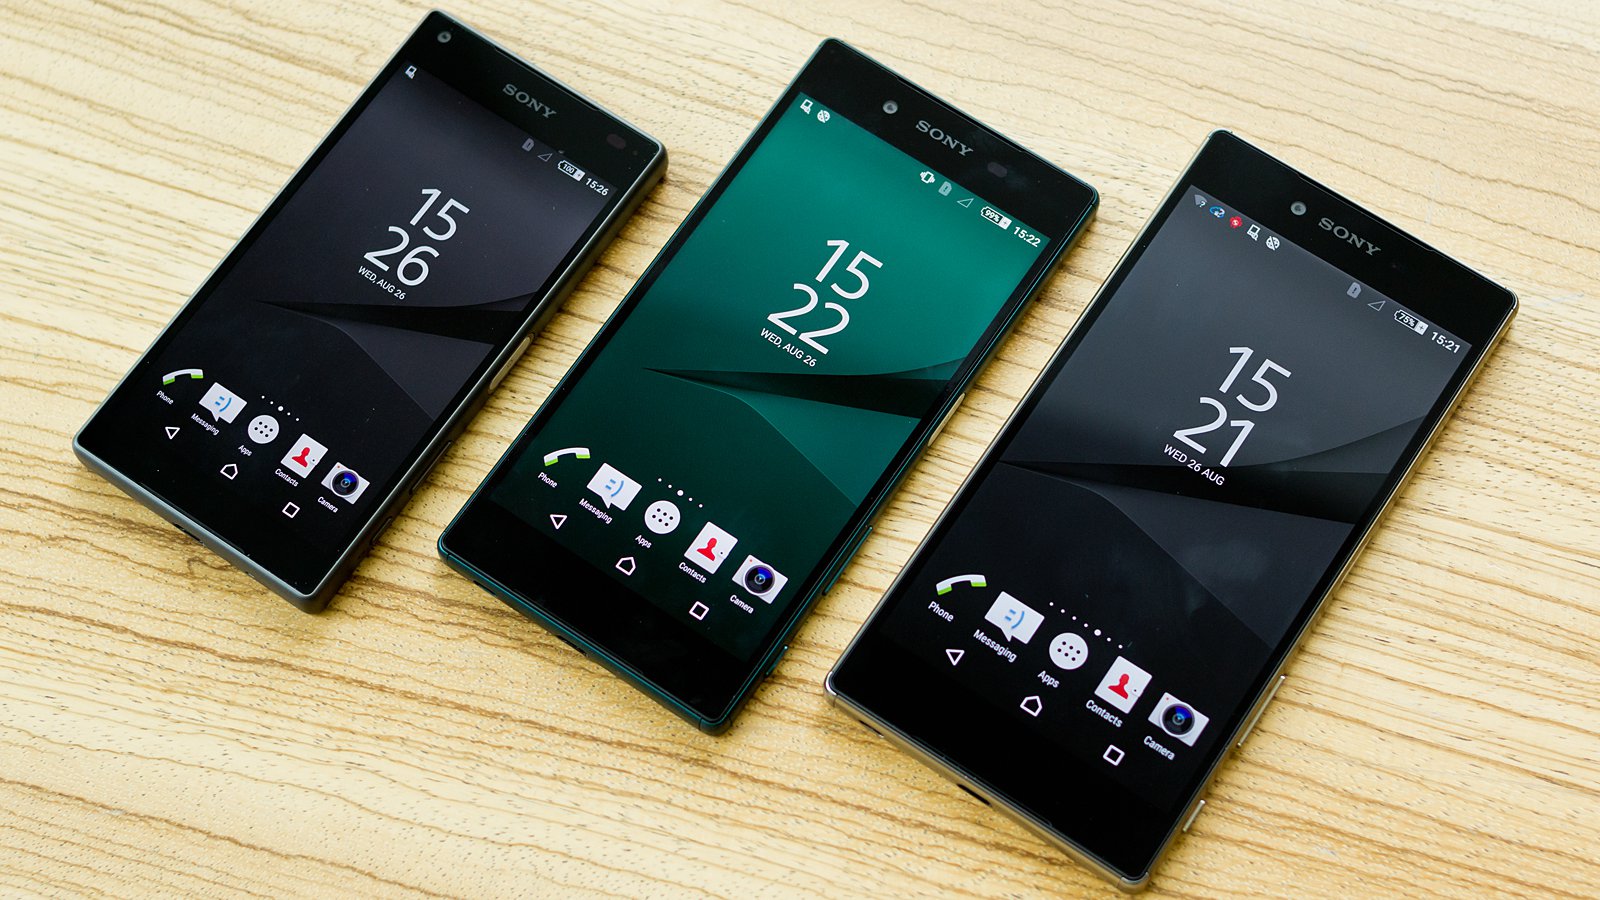 Sony Xperia Z5, Z5 Compact, and Z5 Premium gets new Android  update